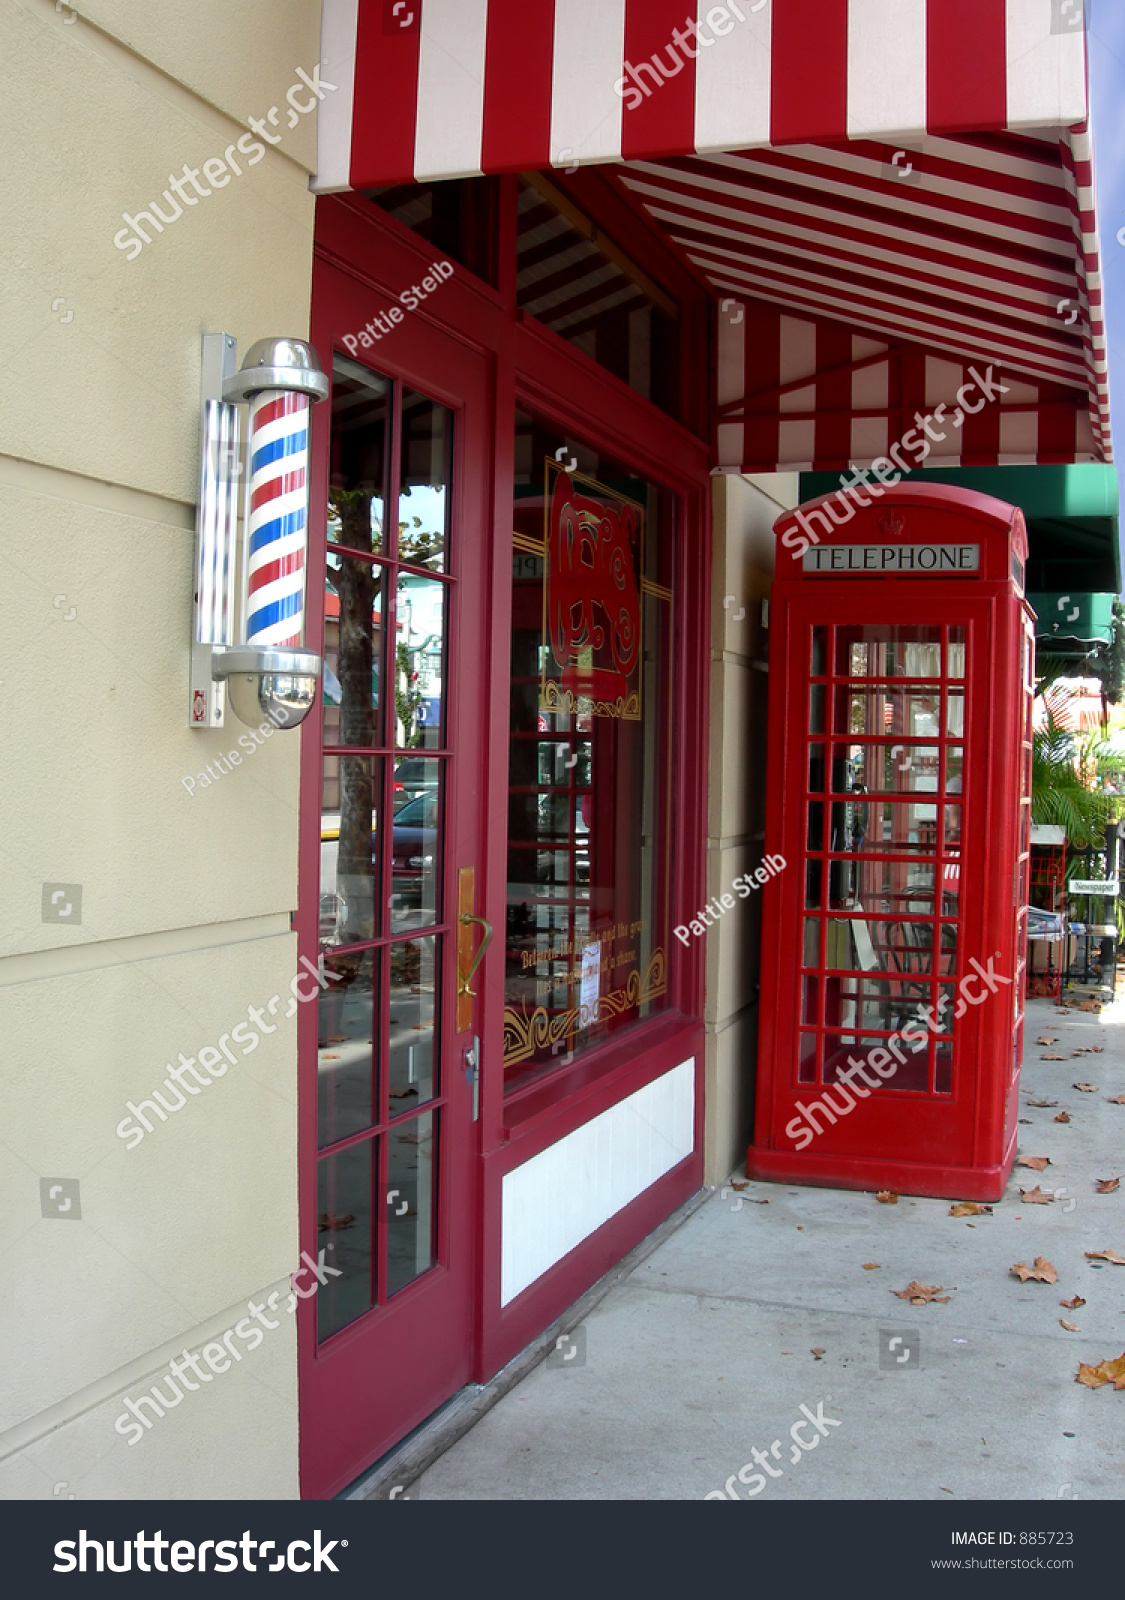 Old-Fashioned, Small Town Barber Shop With Telephone Booth Stock Photo ...